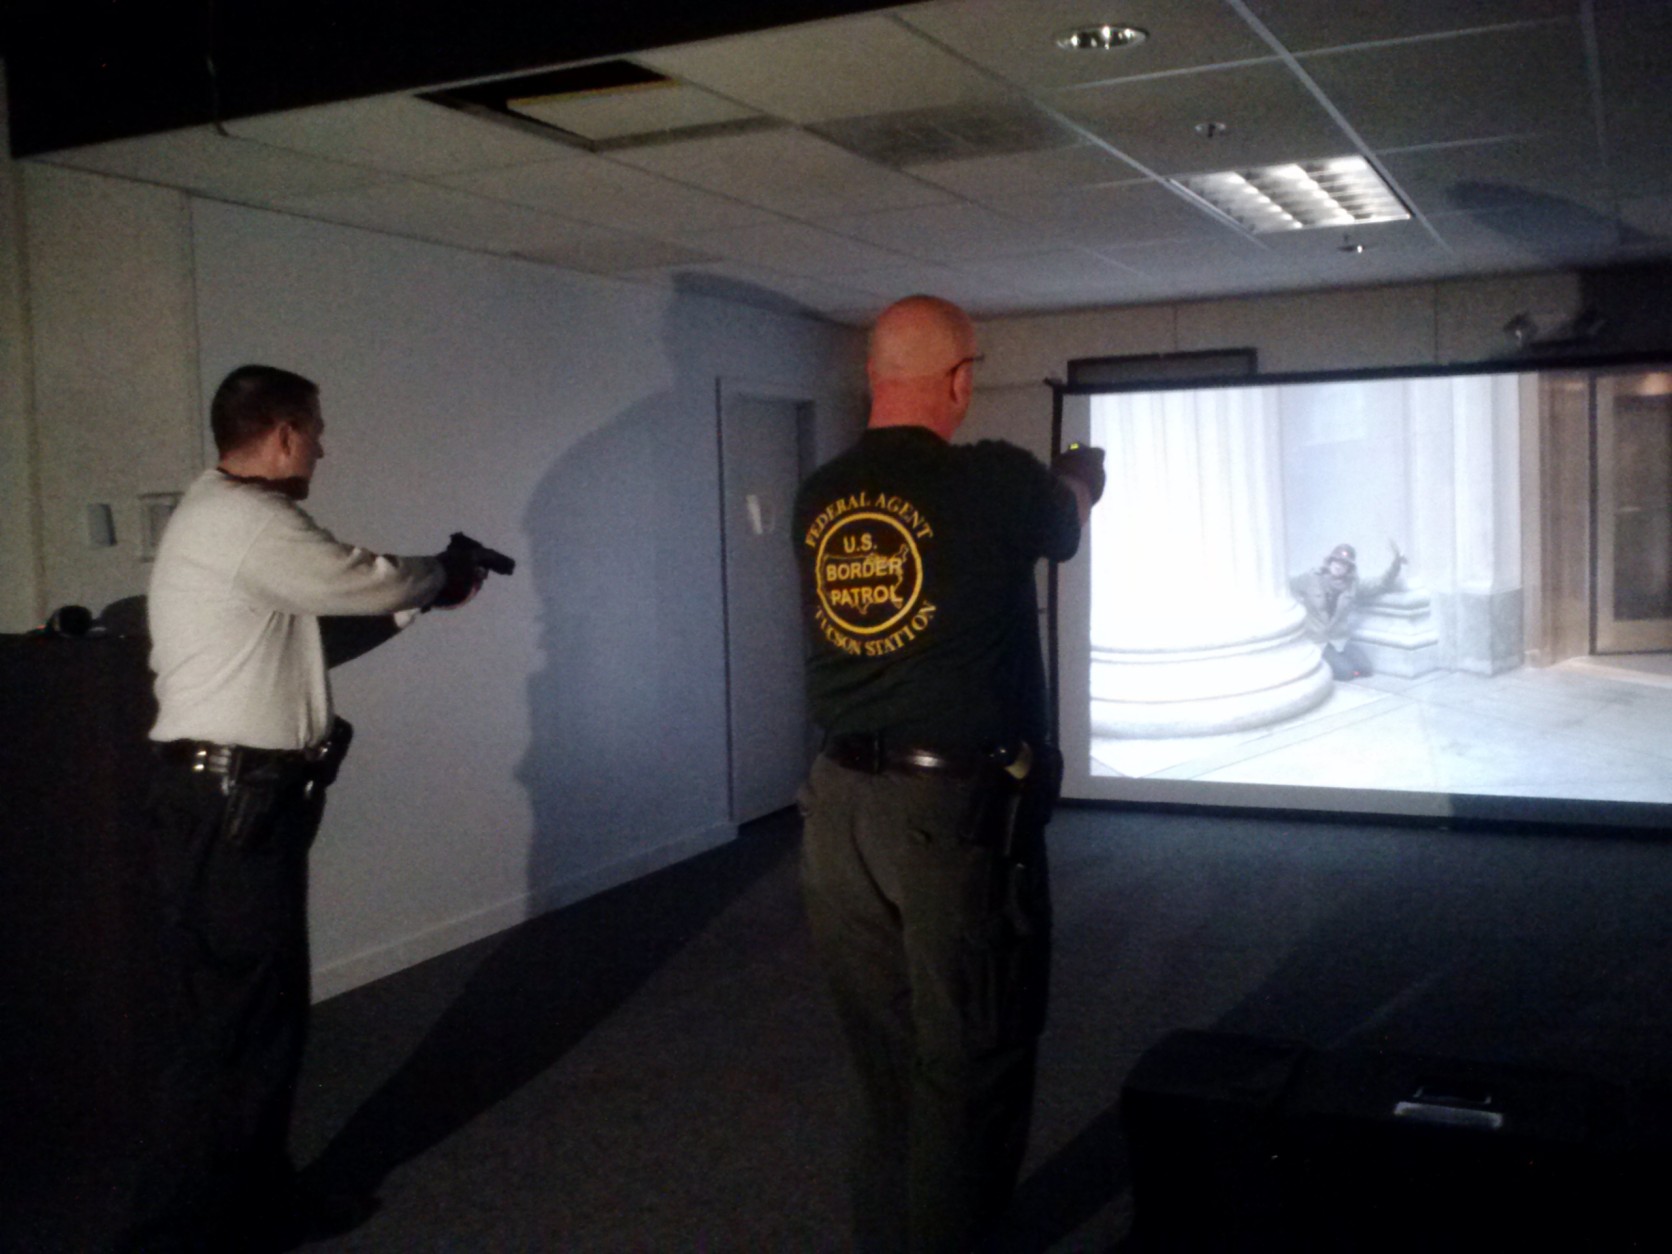 Officers point simulated weapons at the target shown on screen during a de-escalation simulation. (WTOP/Max Smith)